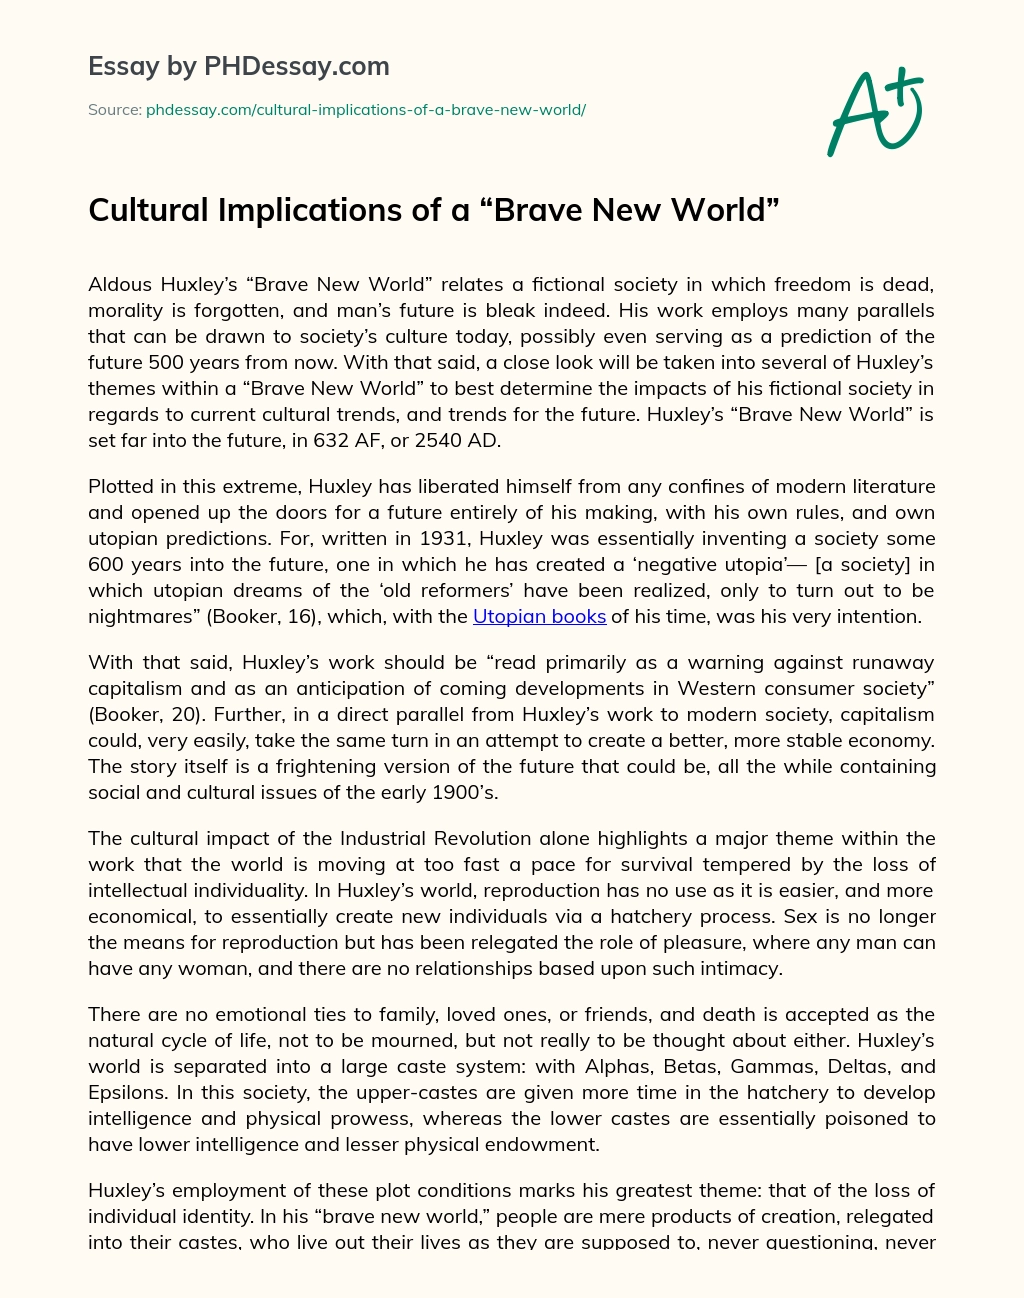 Cultural Implications of a “Brave New World” essay